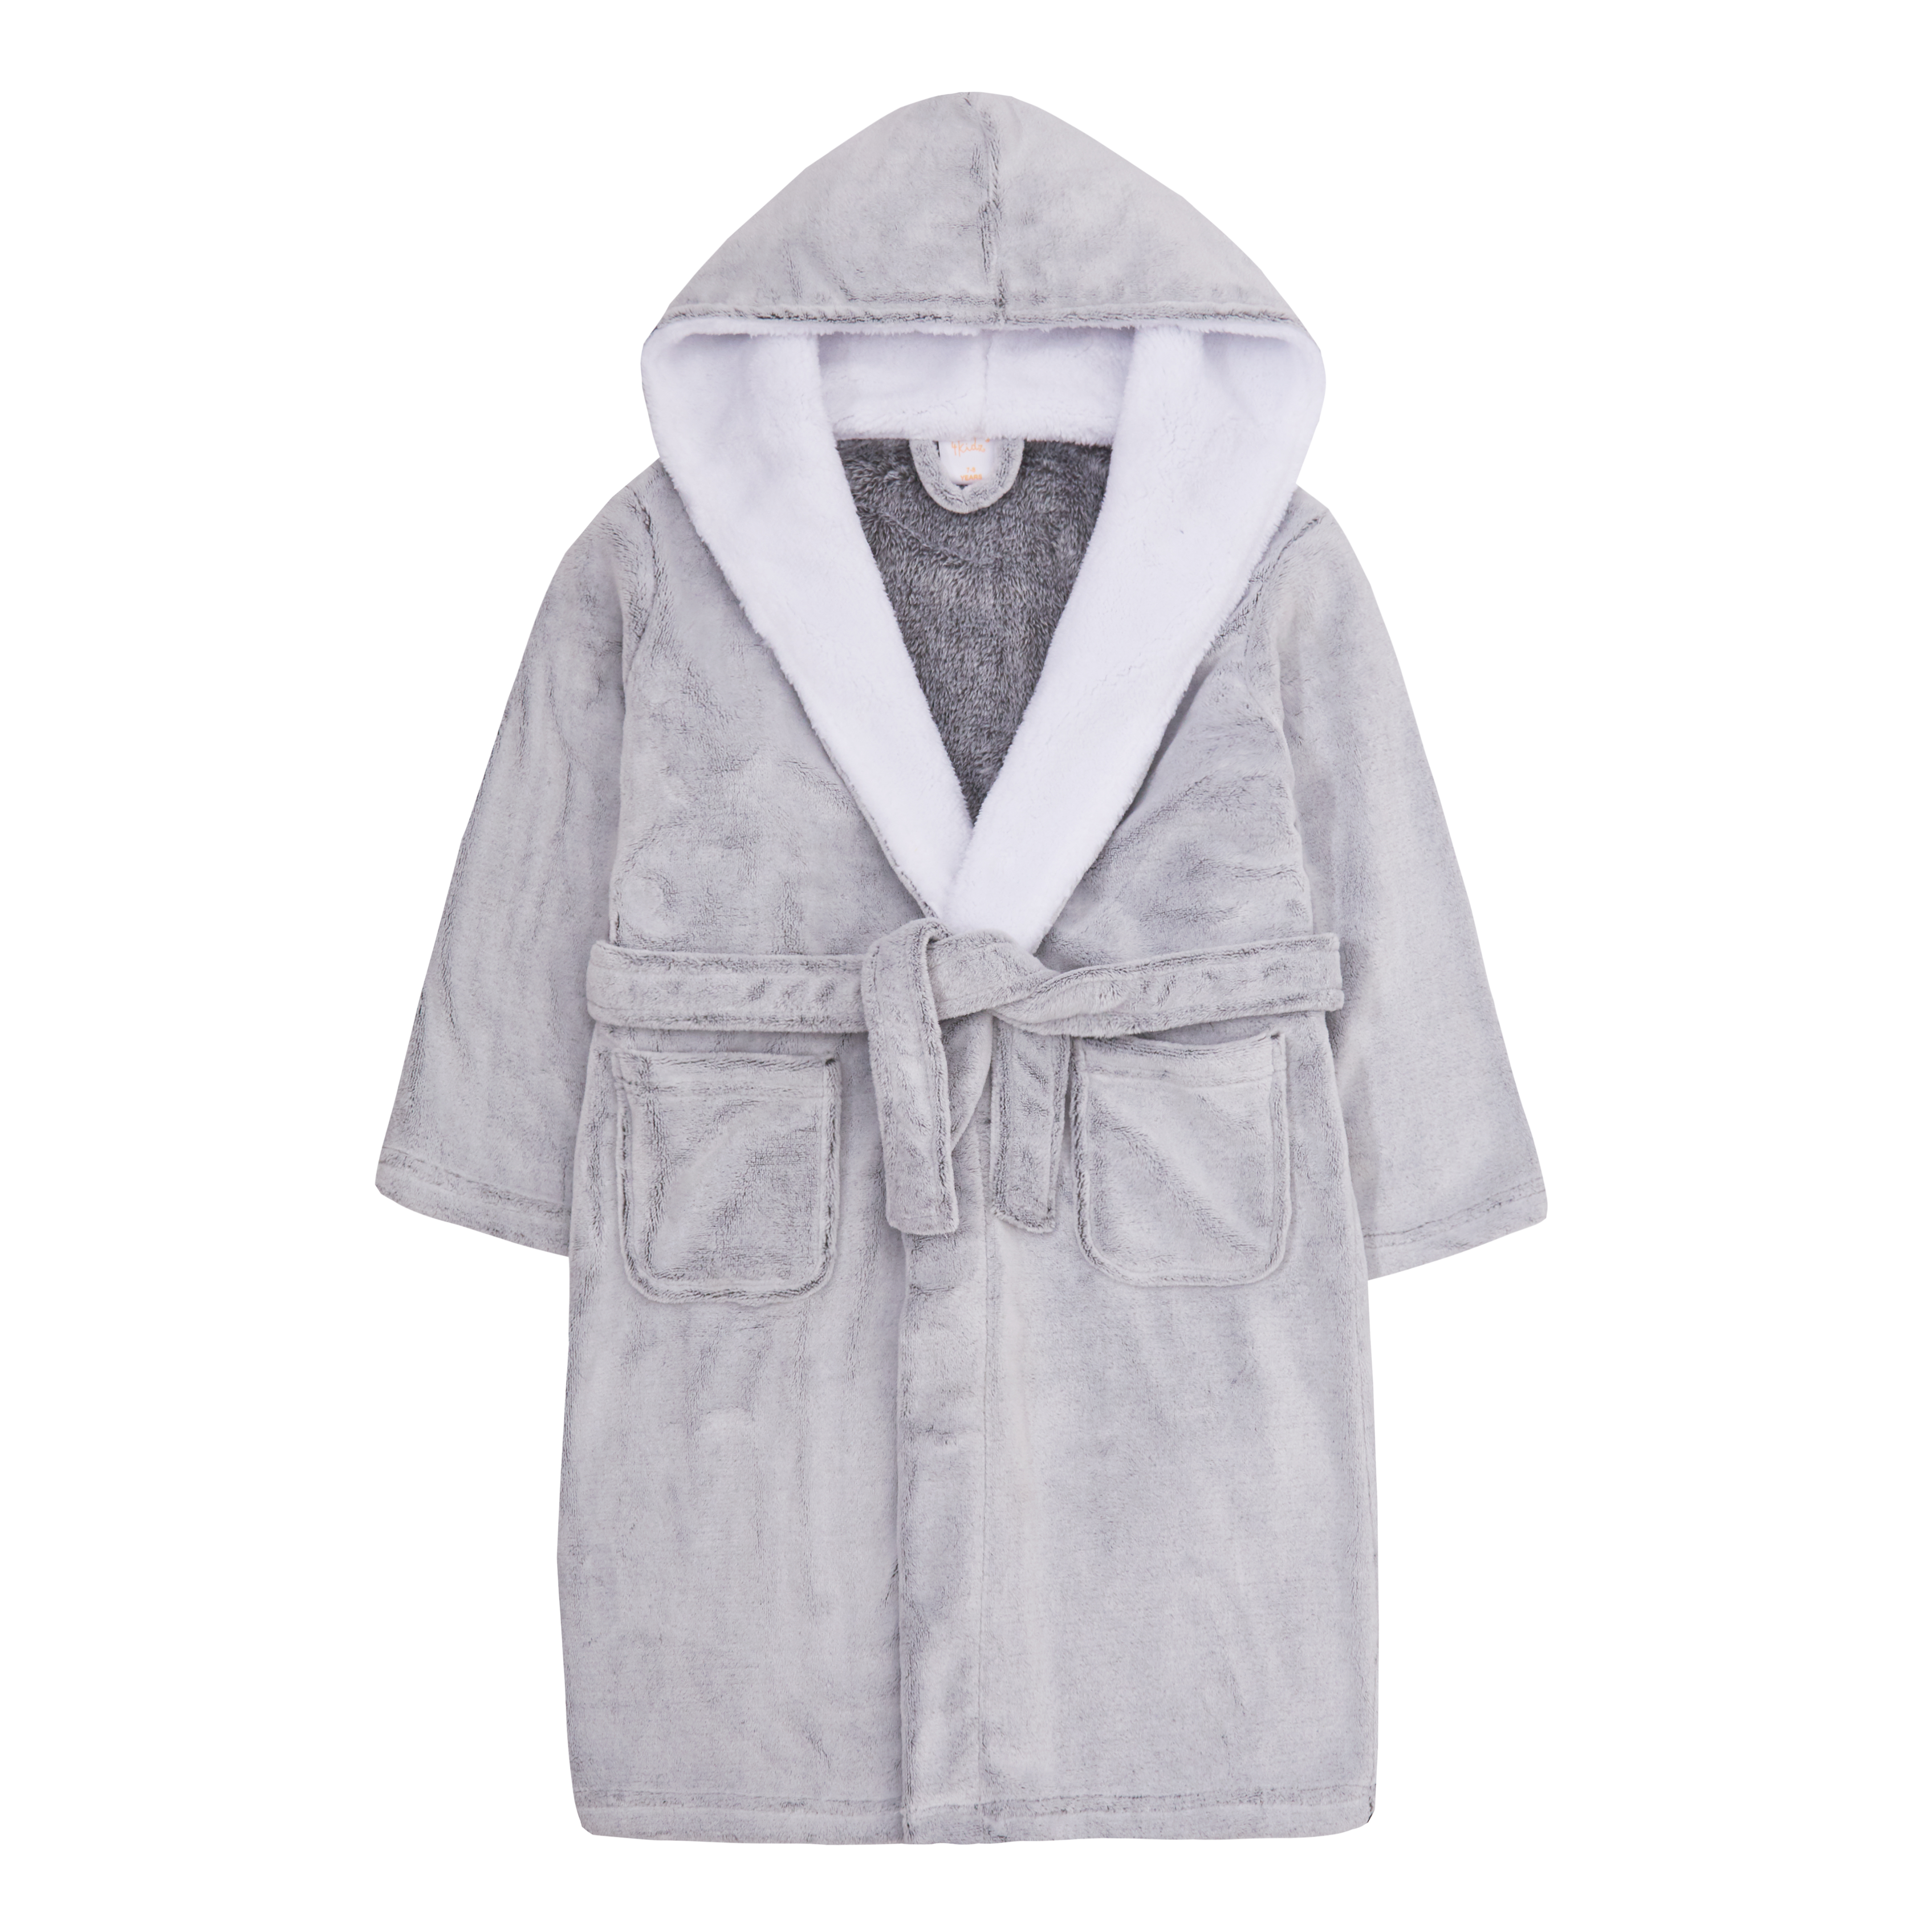 12 Luxury Dressing Gowns  Best Dressing Gowns for Women